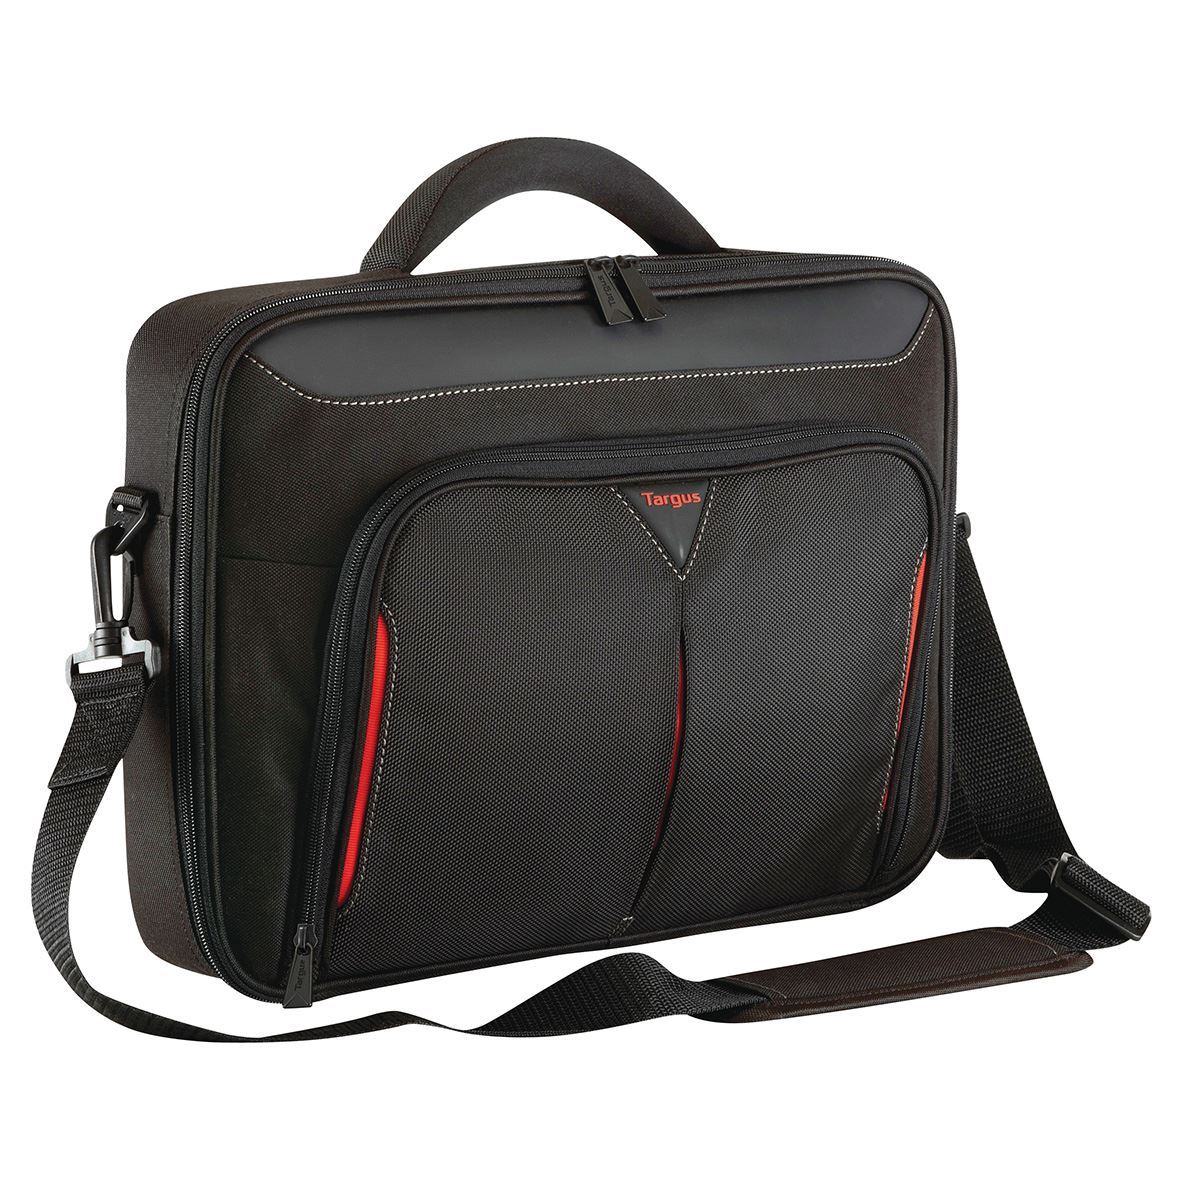 Targus Classic 14 Clamshell Case - Black/Red